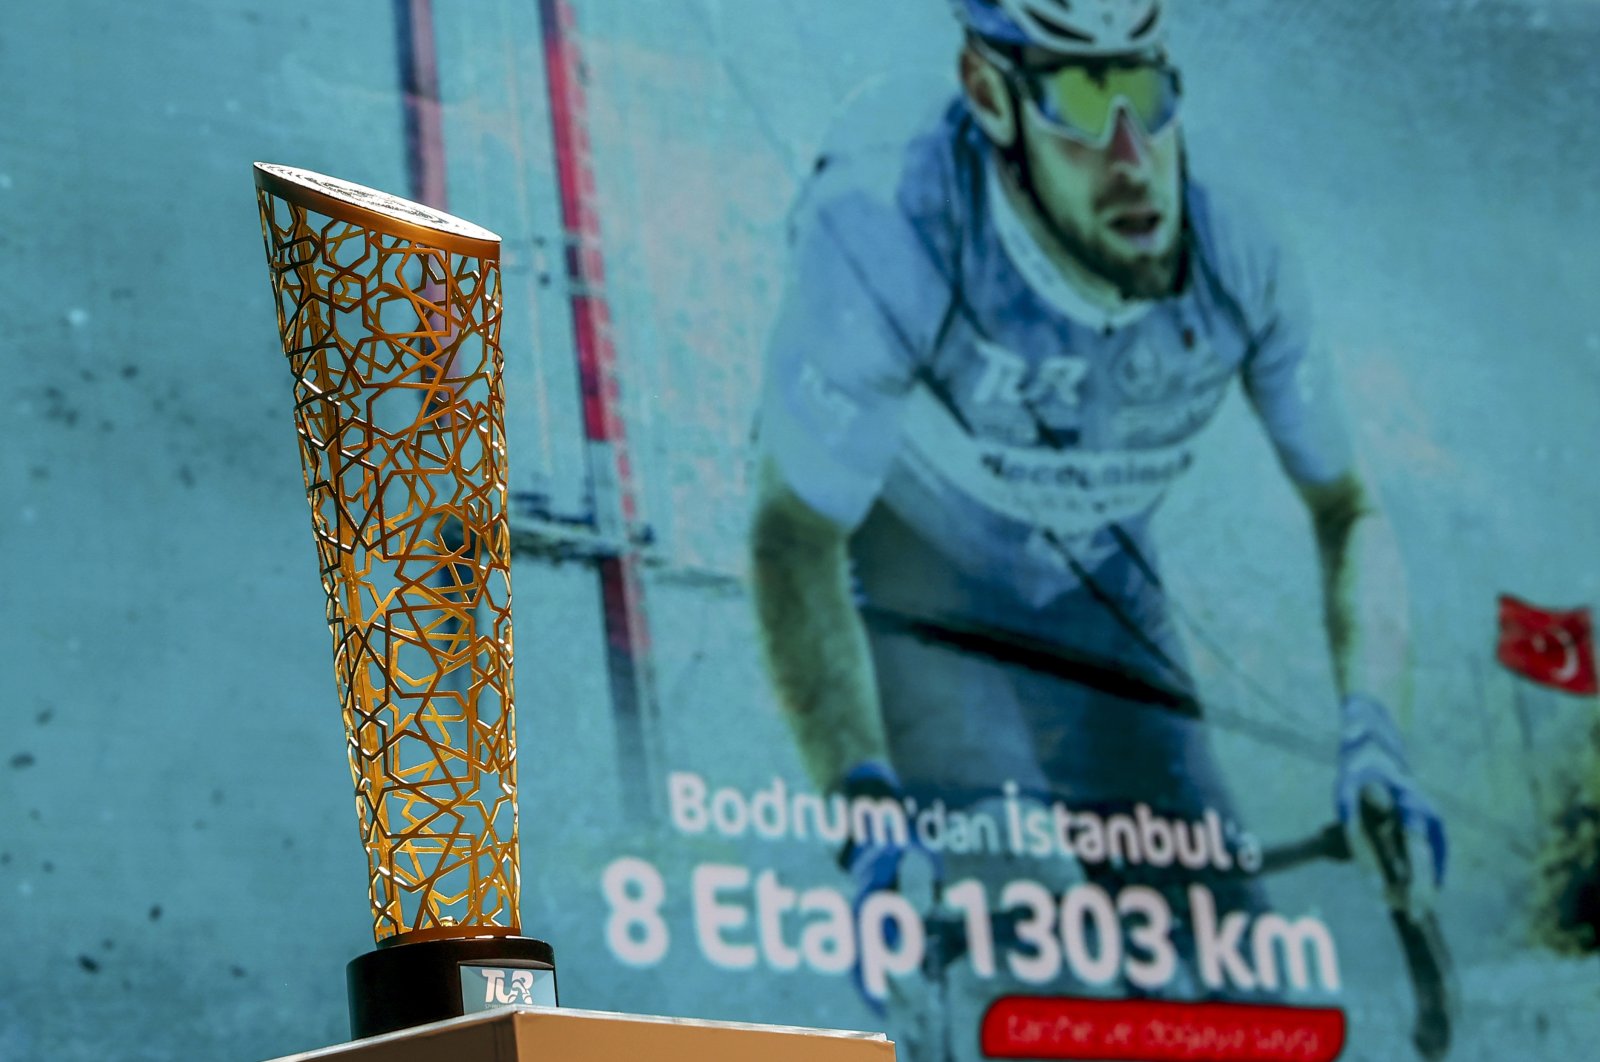 The Tour of Turkiye trophy is seen during an event, Istanbul, Turkey, March 15, 2022. (AA Photo)